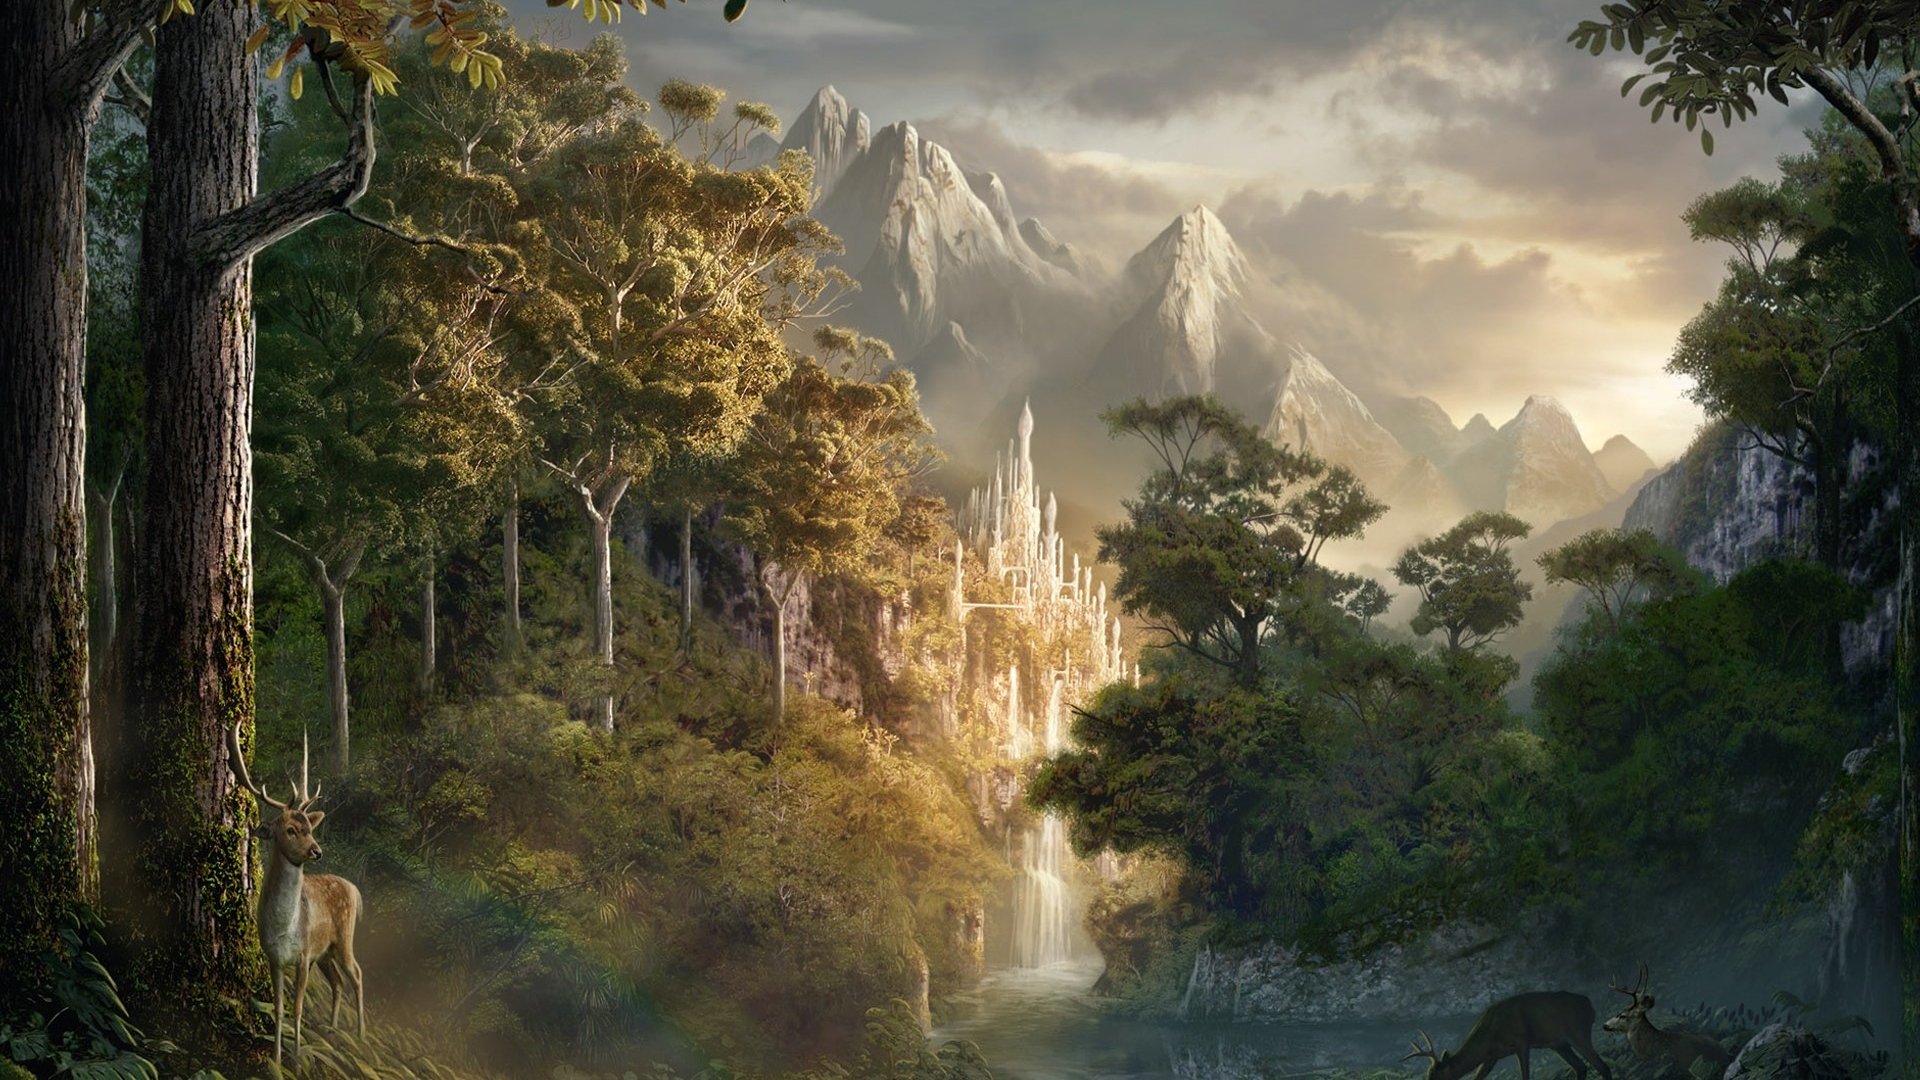 Lord Of The Rings wallpaper   660773 1920x1080